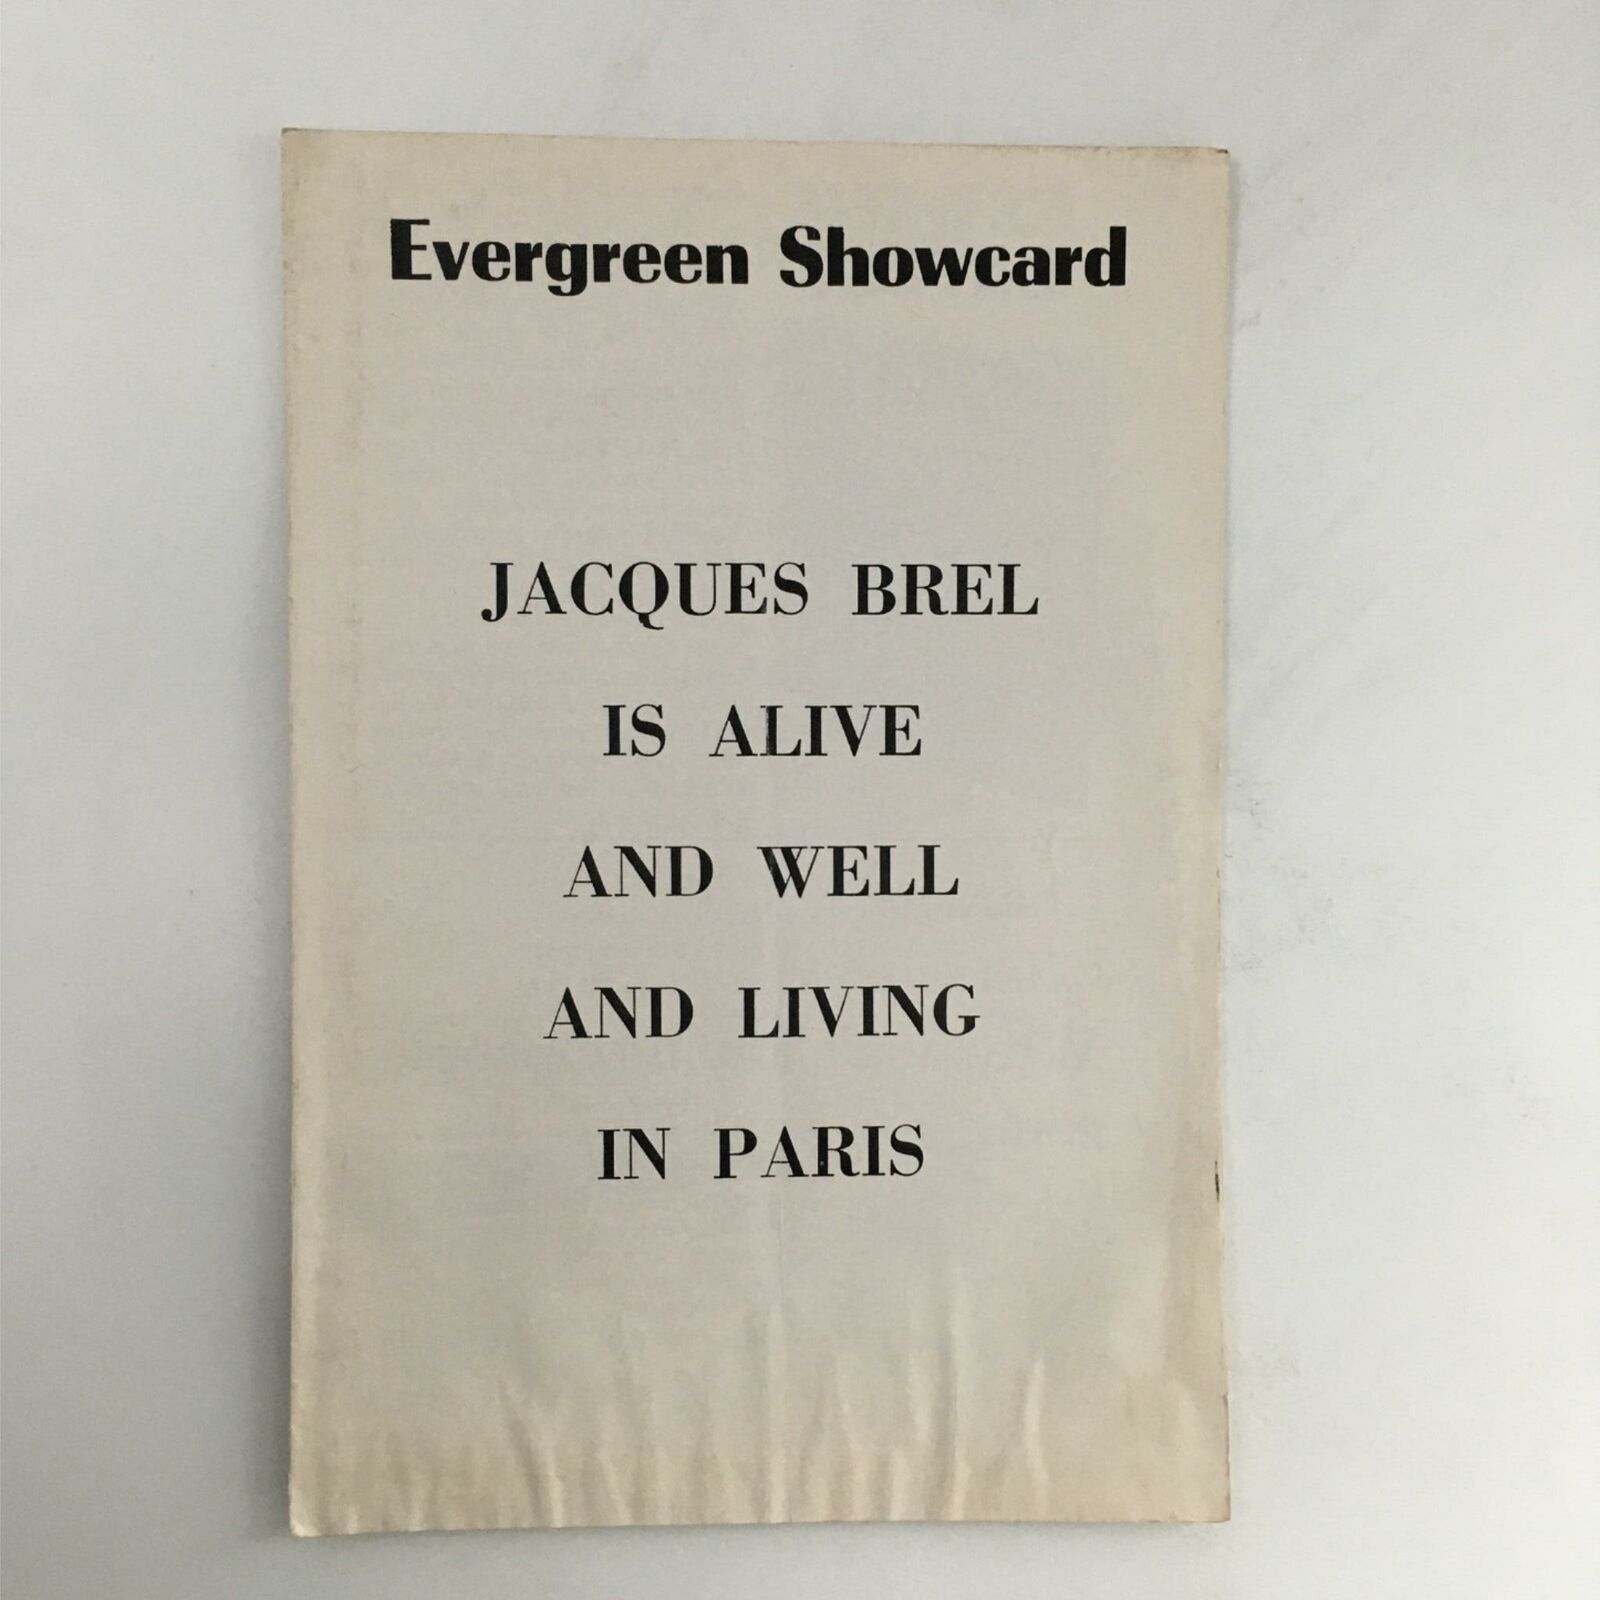 Jacques Brel Is Alive And Well And Living In Paris by Eric Blau at The Limelight